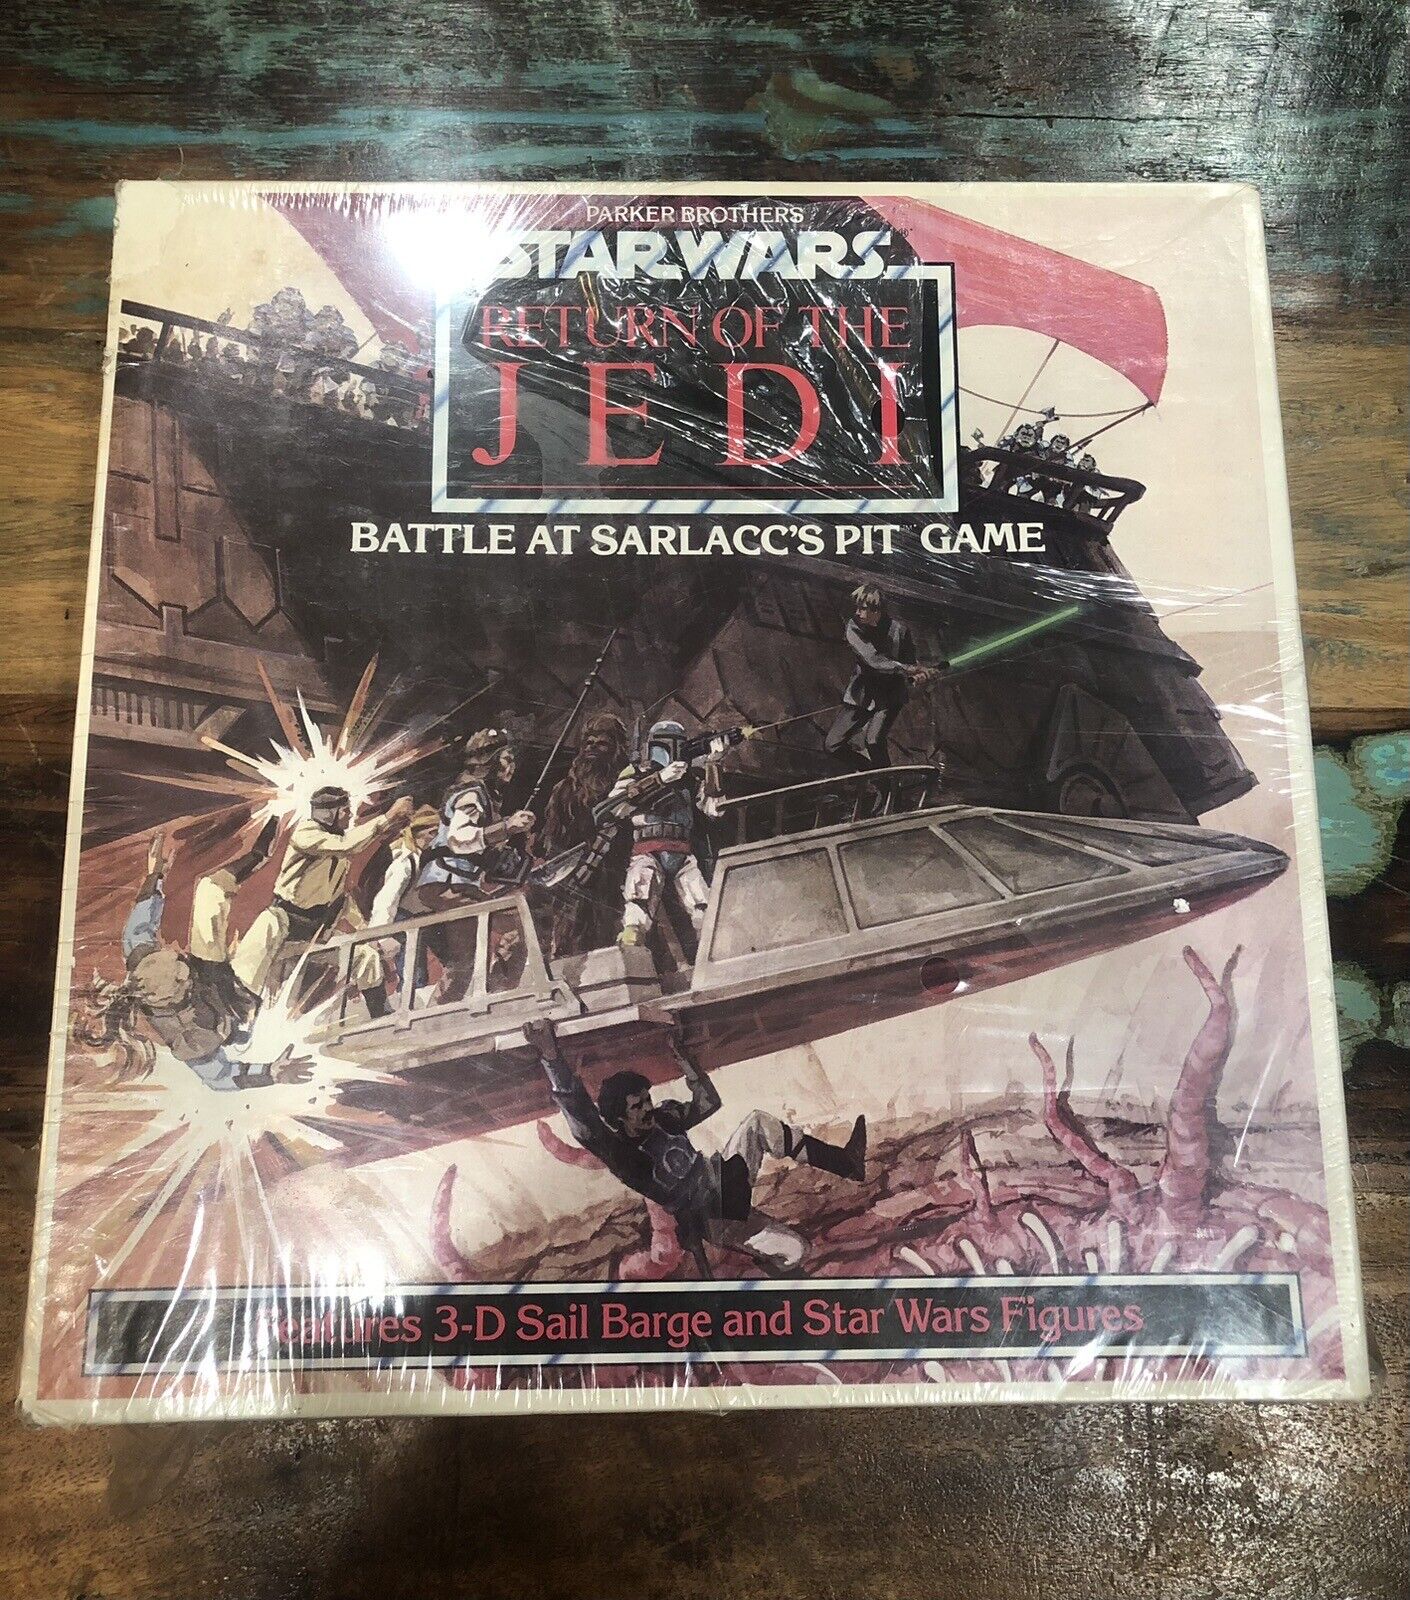 1983 Parker Brothers Return of the Jedi Battle at Sarlaccs Pit Game New In Box